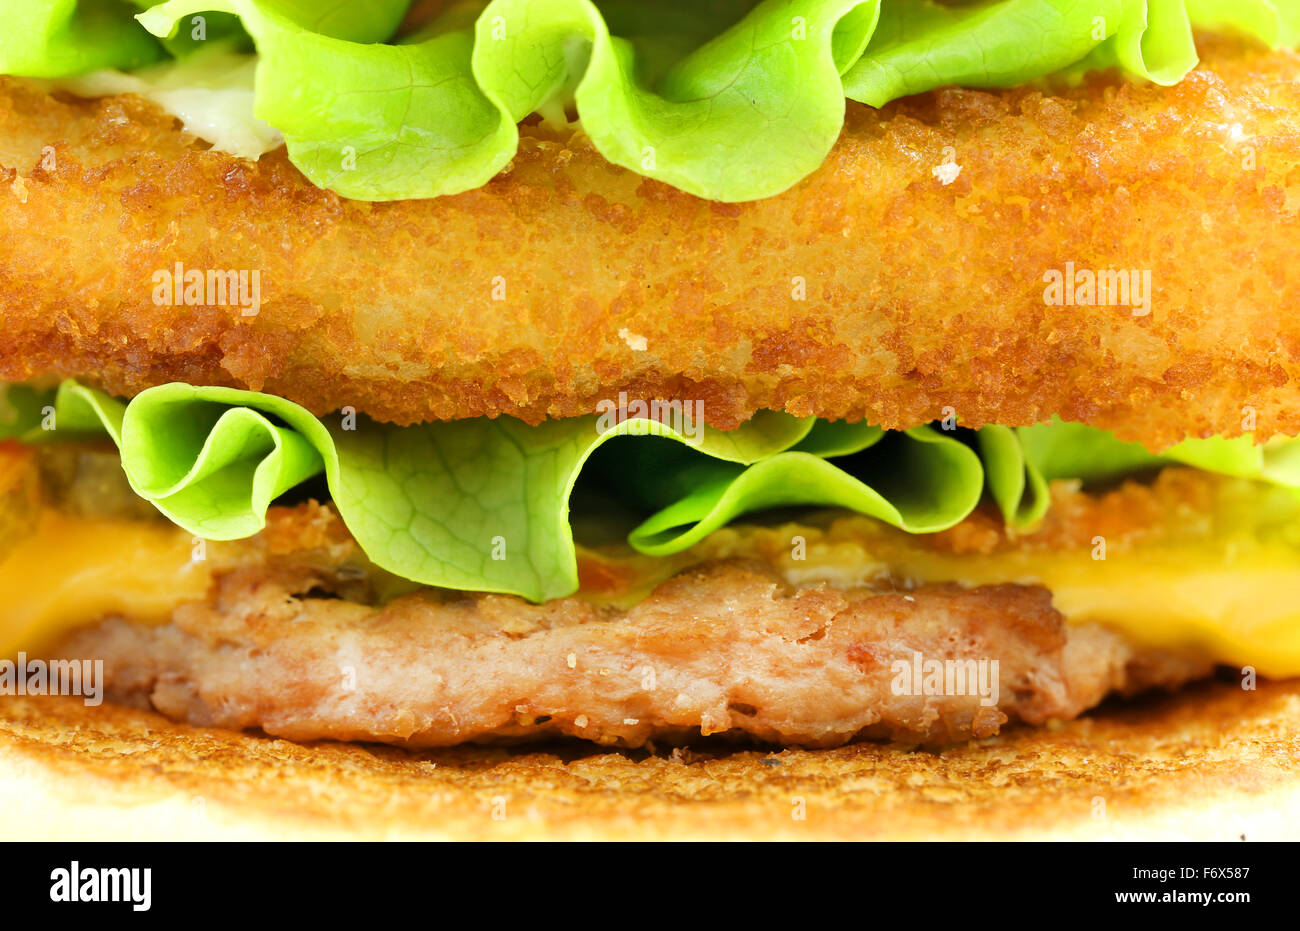 Burger with meat photographed close-up on a white background Stock Photo